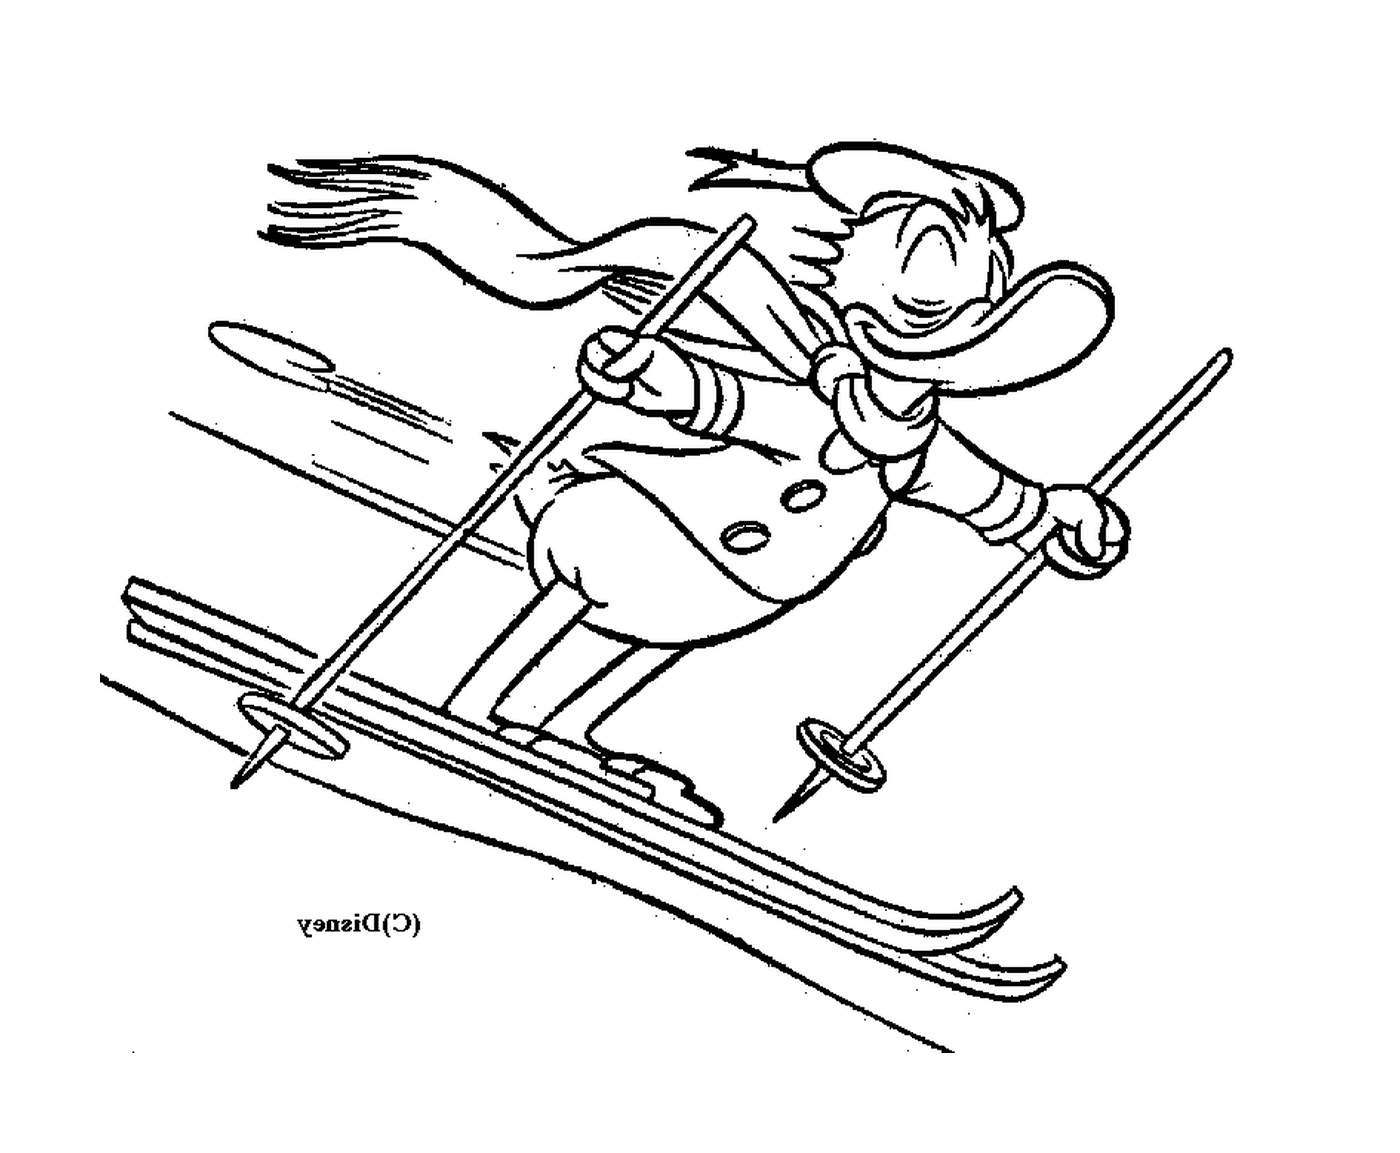  Donald unwinds the ski slopes with ease 